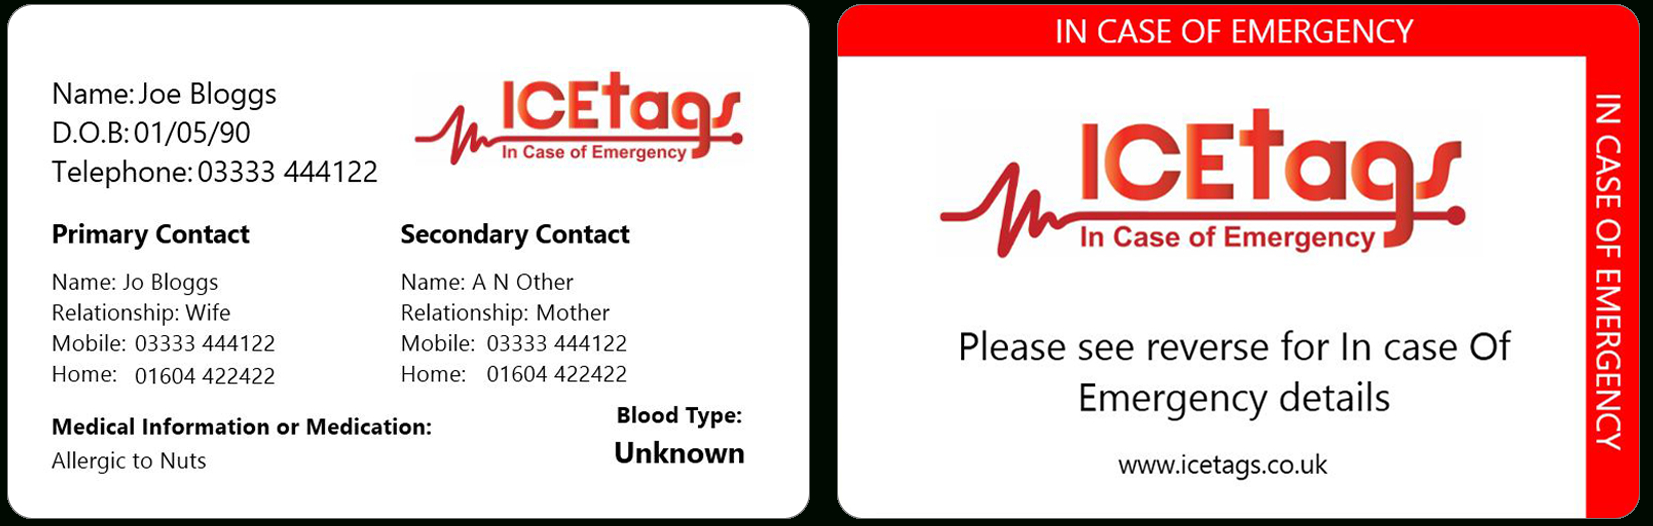 Ice Wallet Card | Full Size Icetags | Free Uk Delivery Intended For In Case Of Emergency Card Template